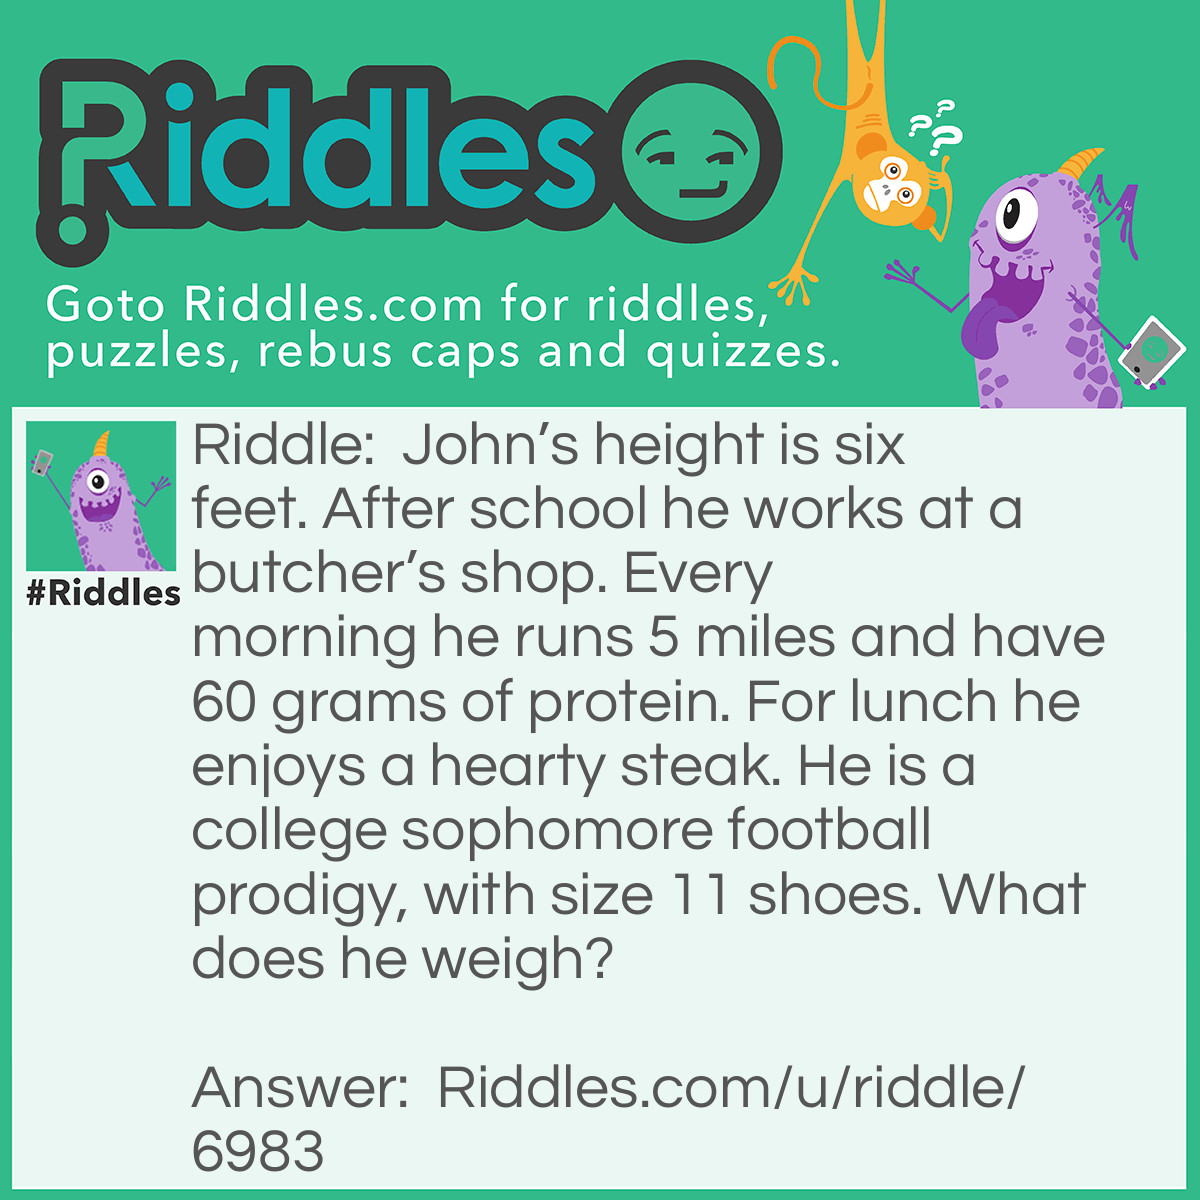 Riddle: John's height is six feet. After school he works at a butcher's shop. Every morning he runs 5 miles and have 60 grams of protein. For lunch he enjoys a hearty steak. He is a college sophomore football prodigy, with size 11 shoes. What does he weigh? Answer: More than 200 lbs, but his job is meat.